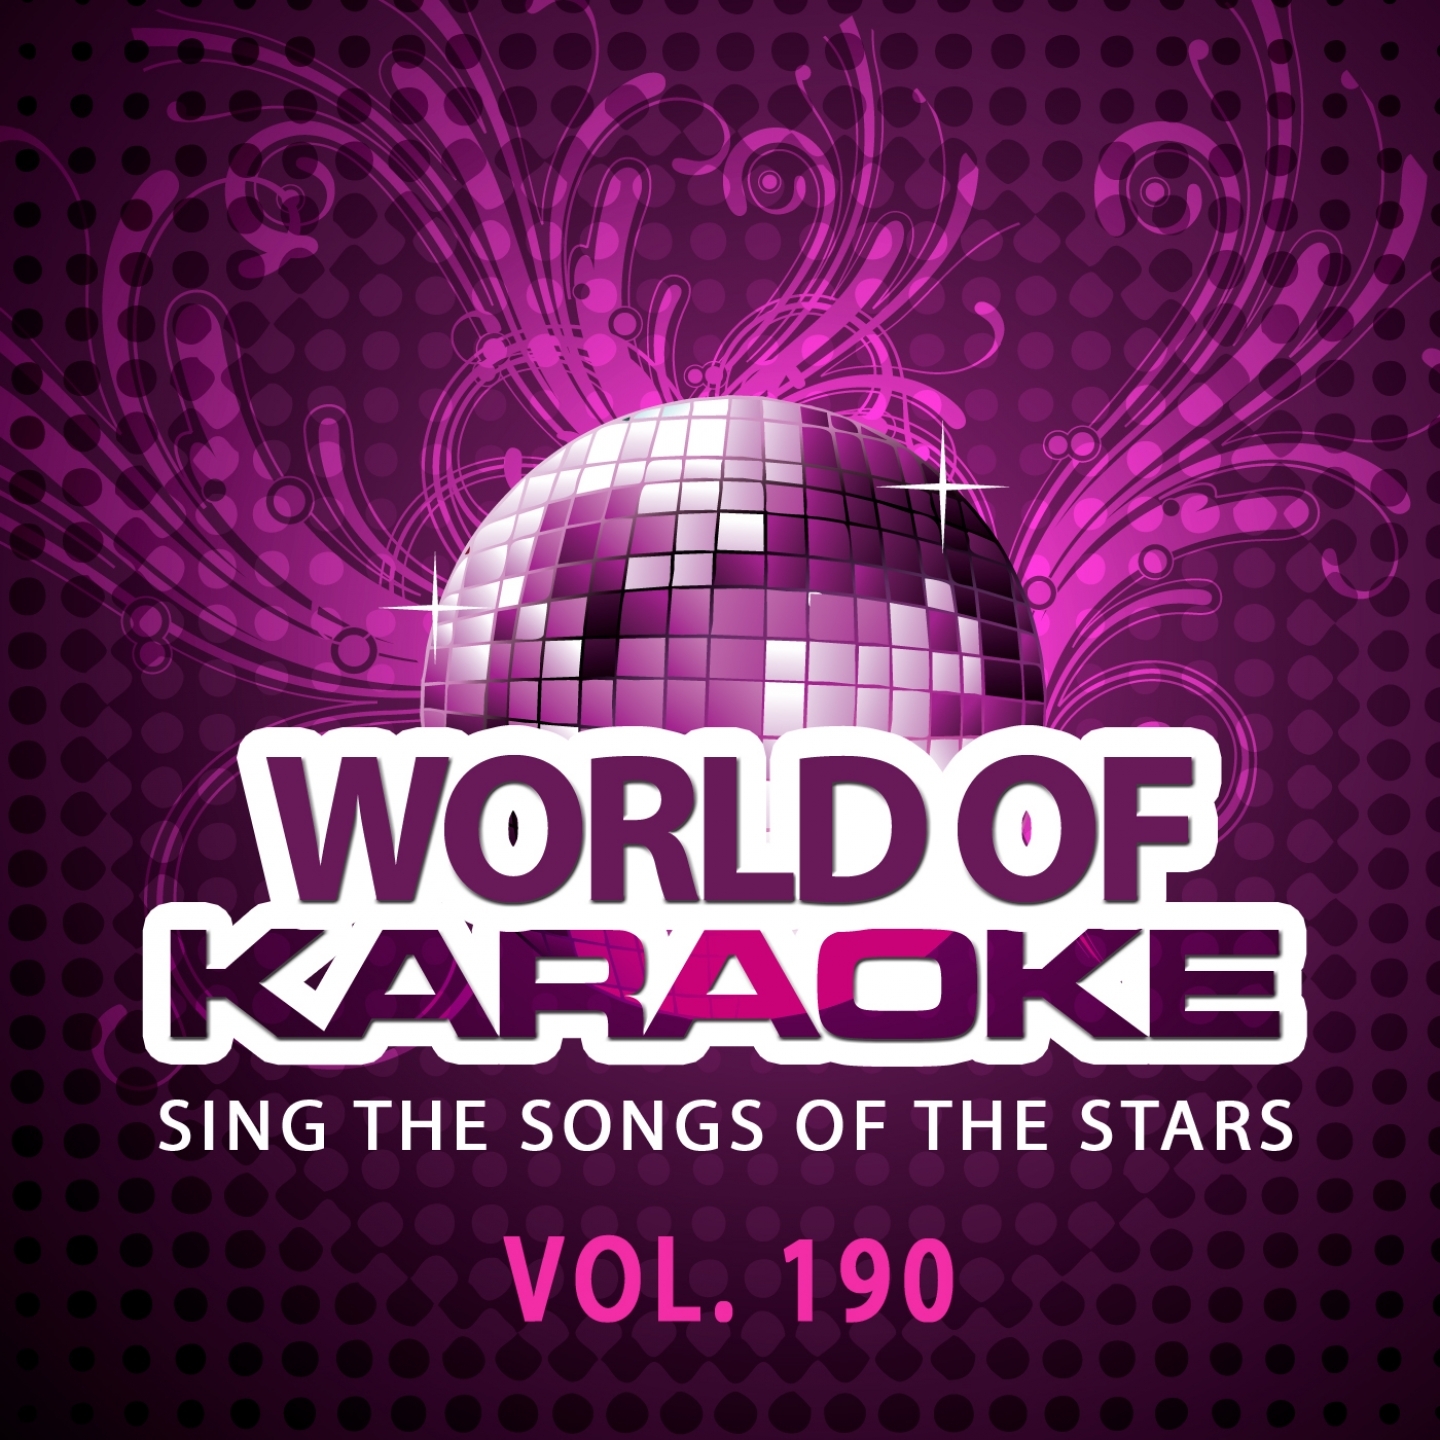 World of Karaoke, Vol. 190 (Sing the Songs of the Stars)